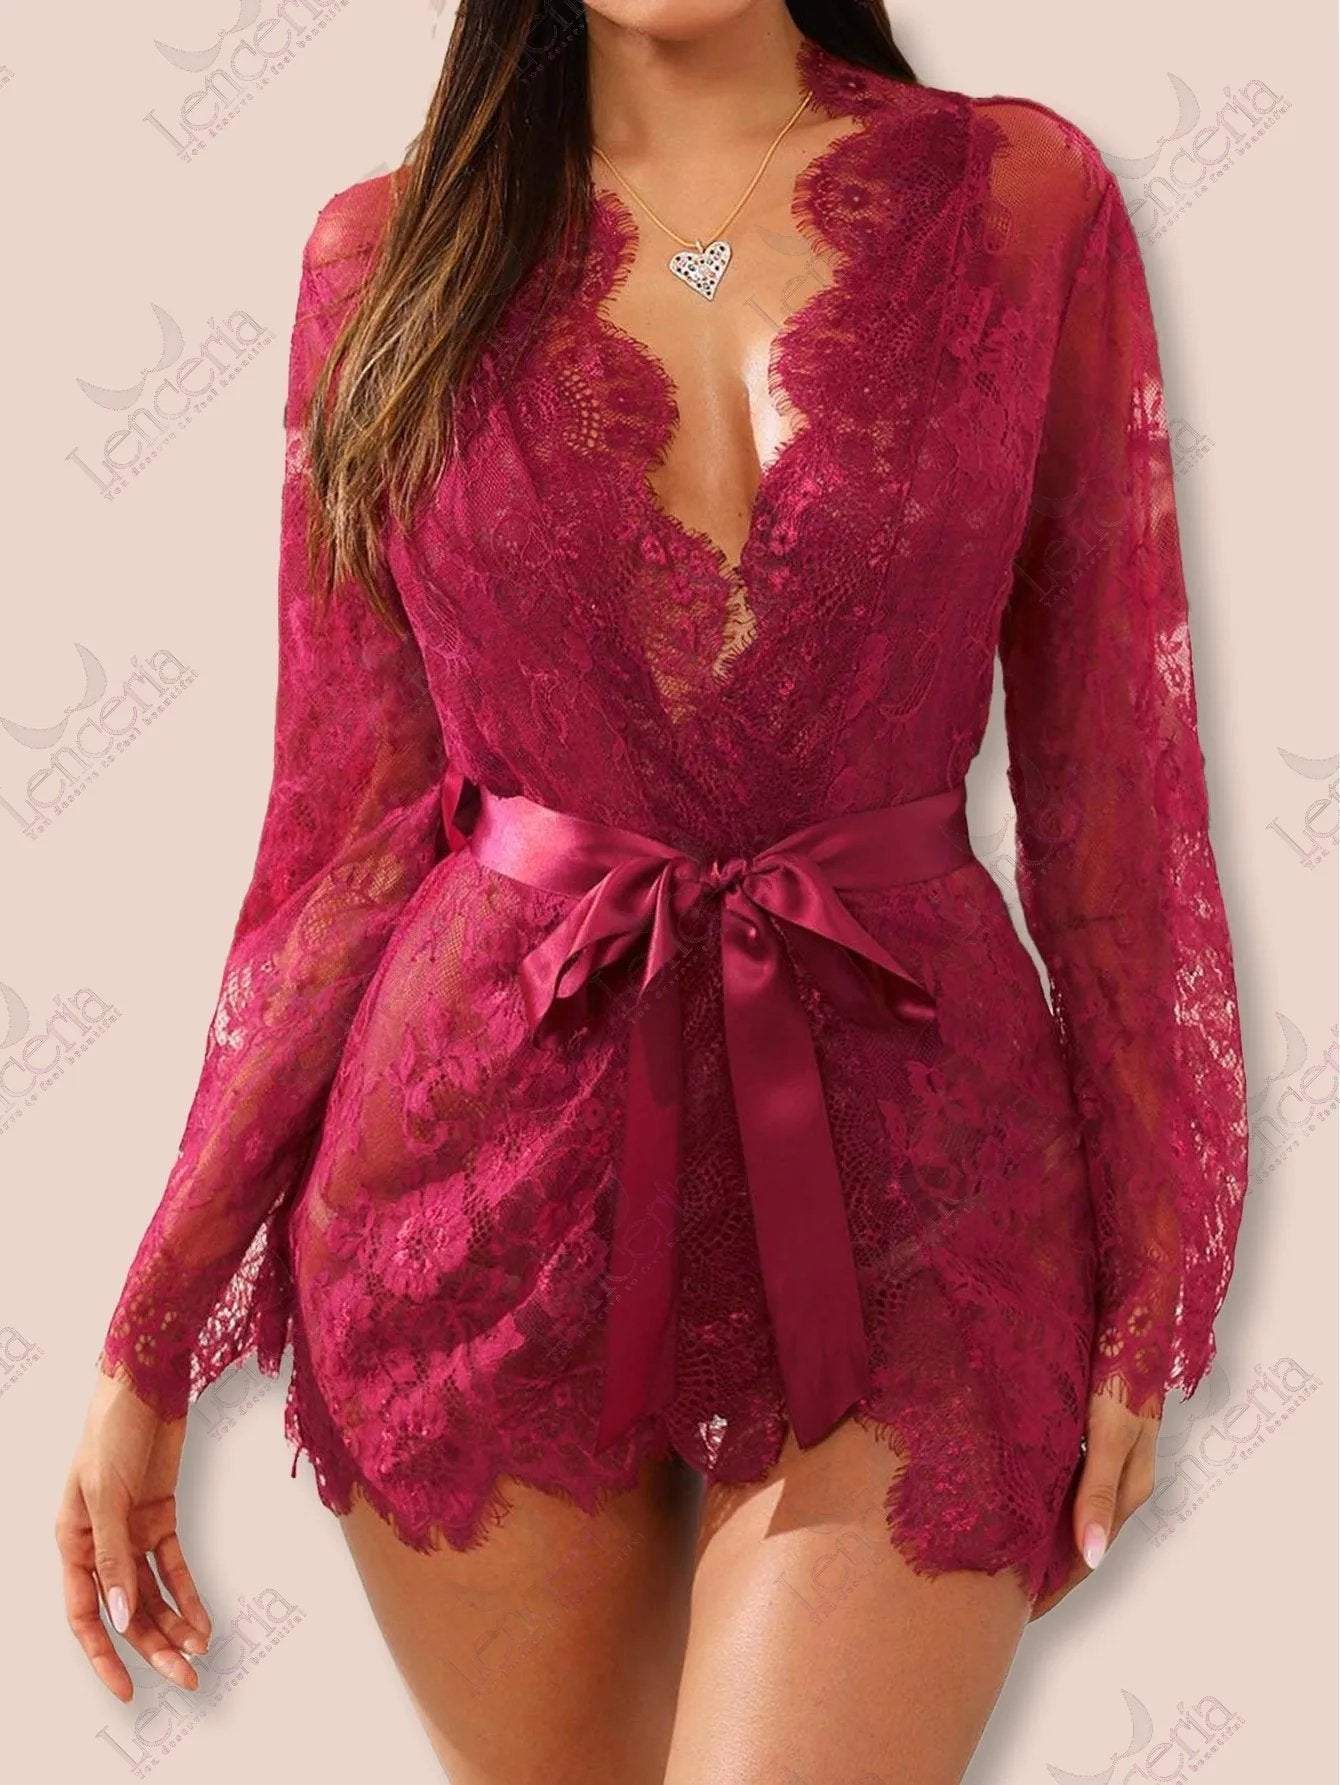 Mariee Bridal lace robe and teddy suit set (3 piece) - extremely stunning (m1) Lenceria-lingerie.pk